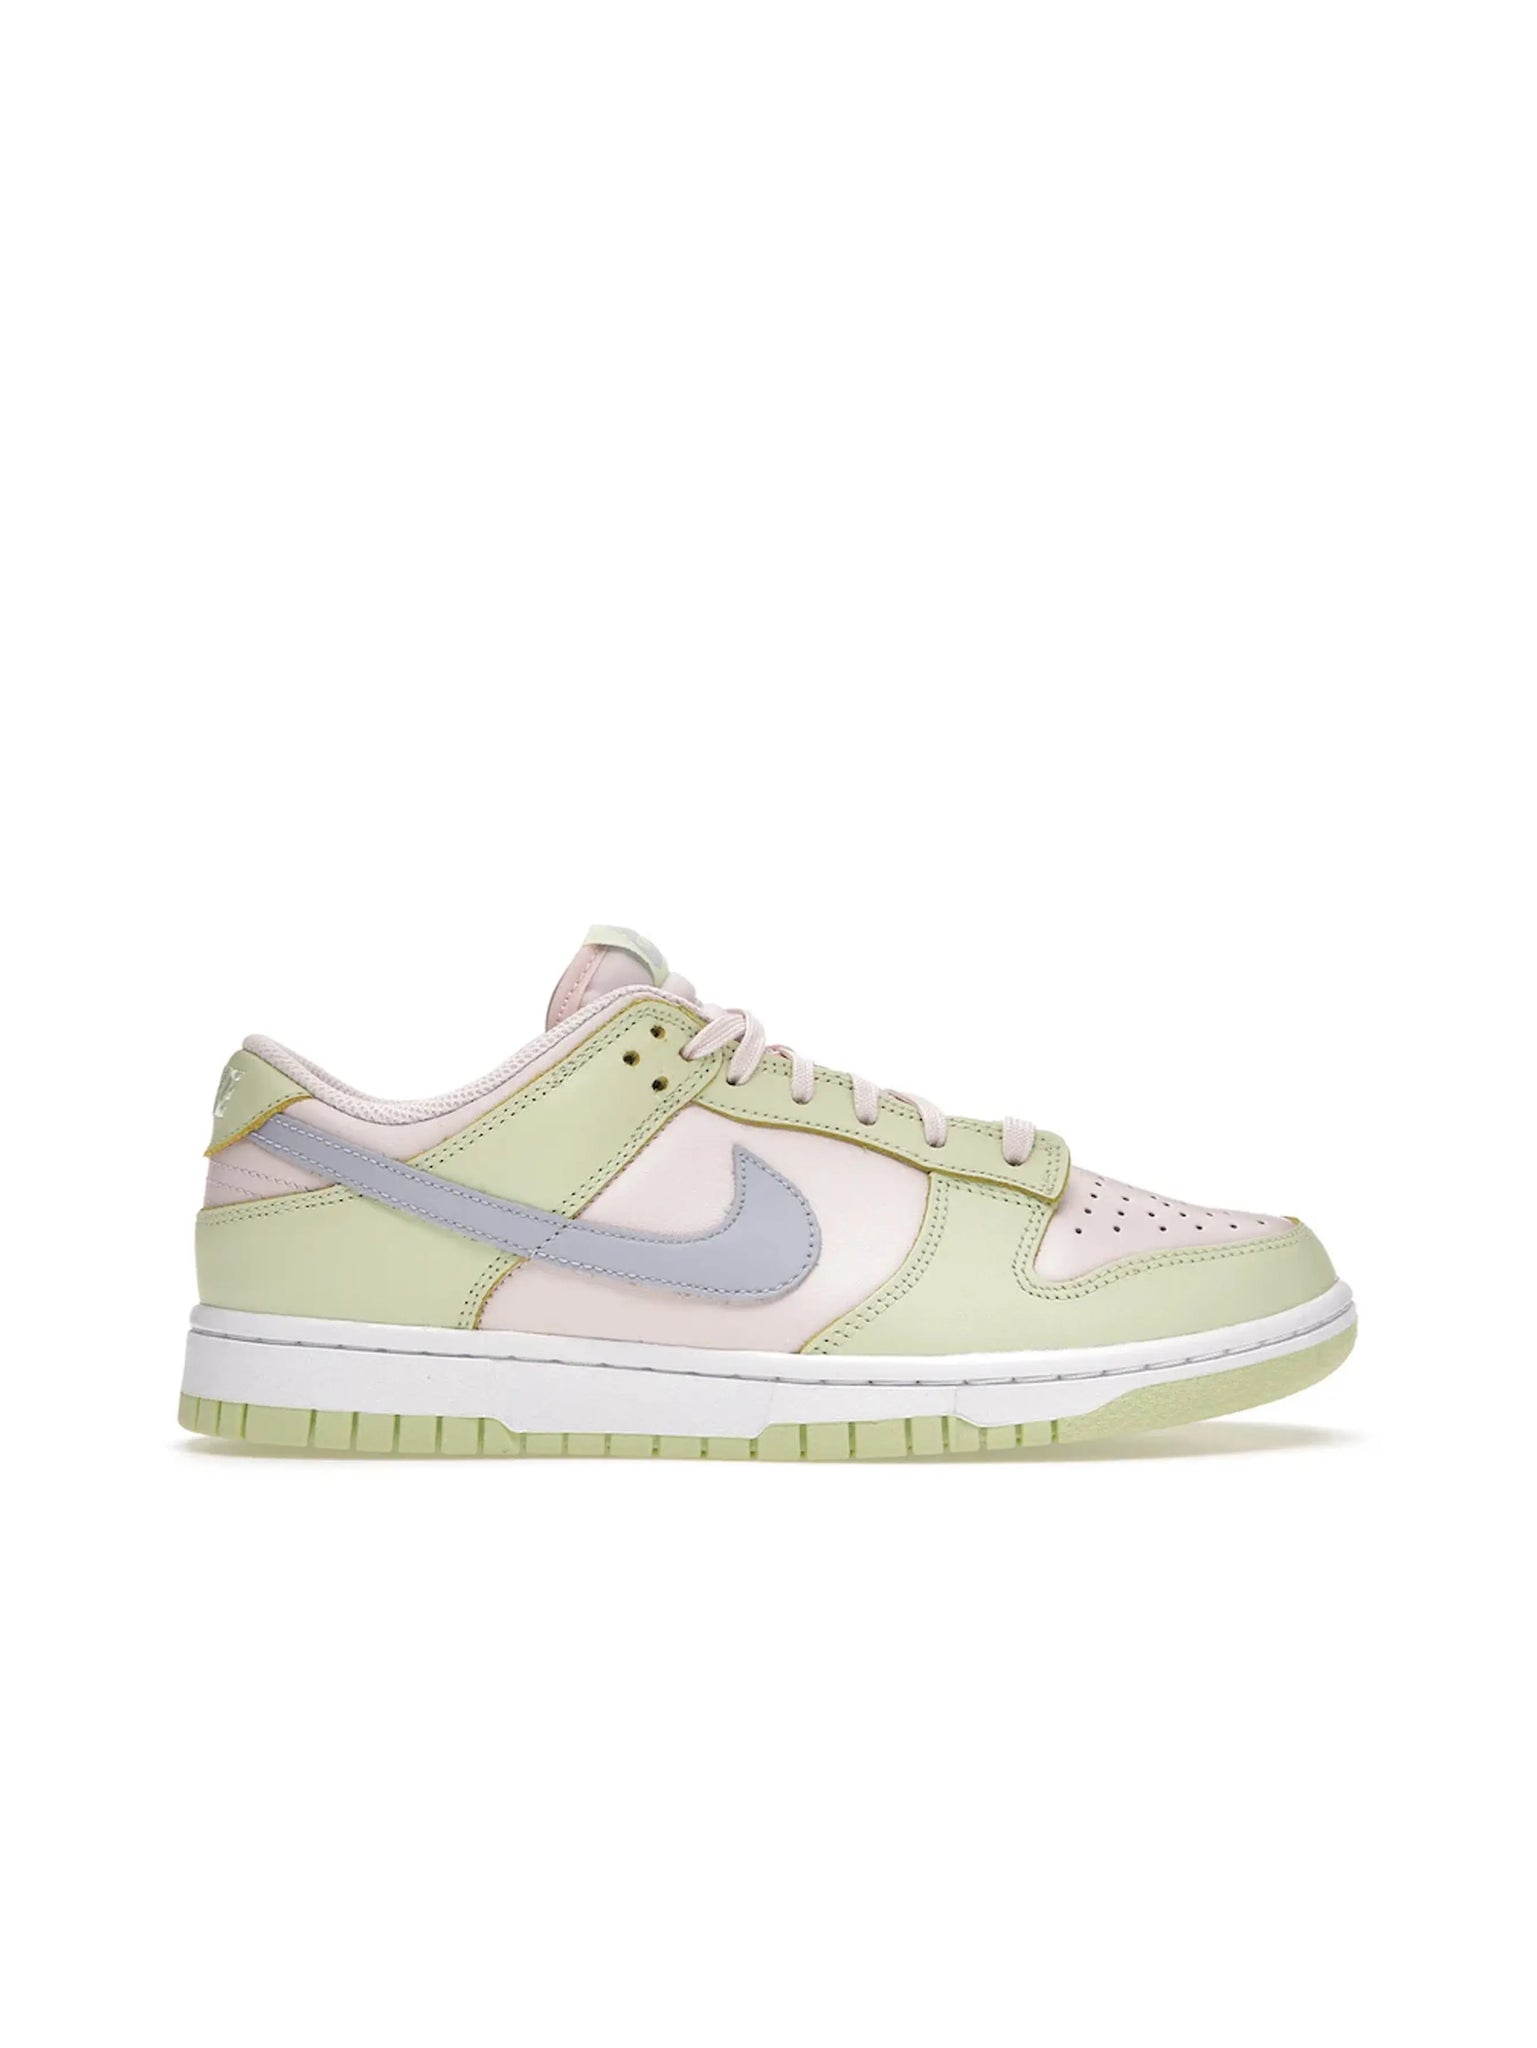 Nike Dunk Low Lime Ice (W) in Auckland, New Zealand - Shop name